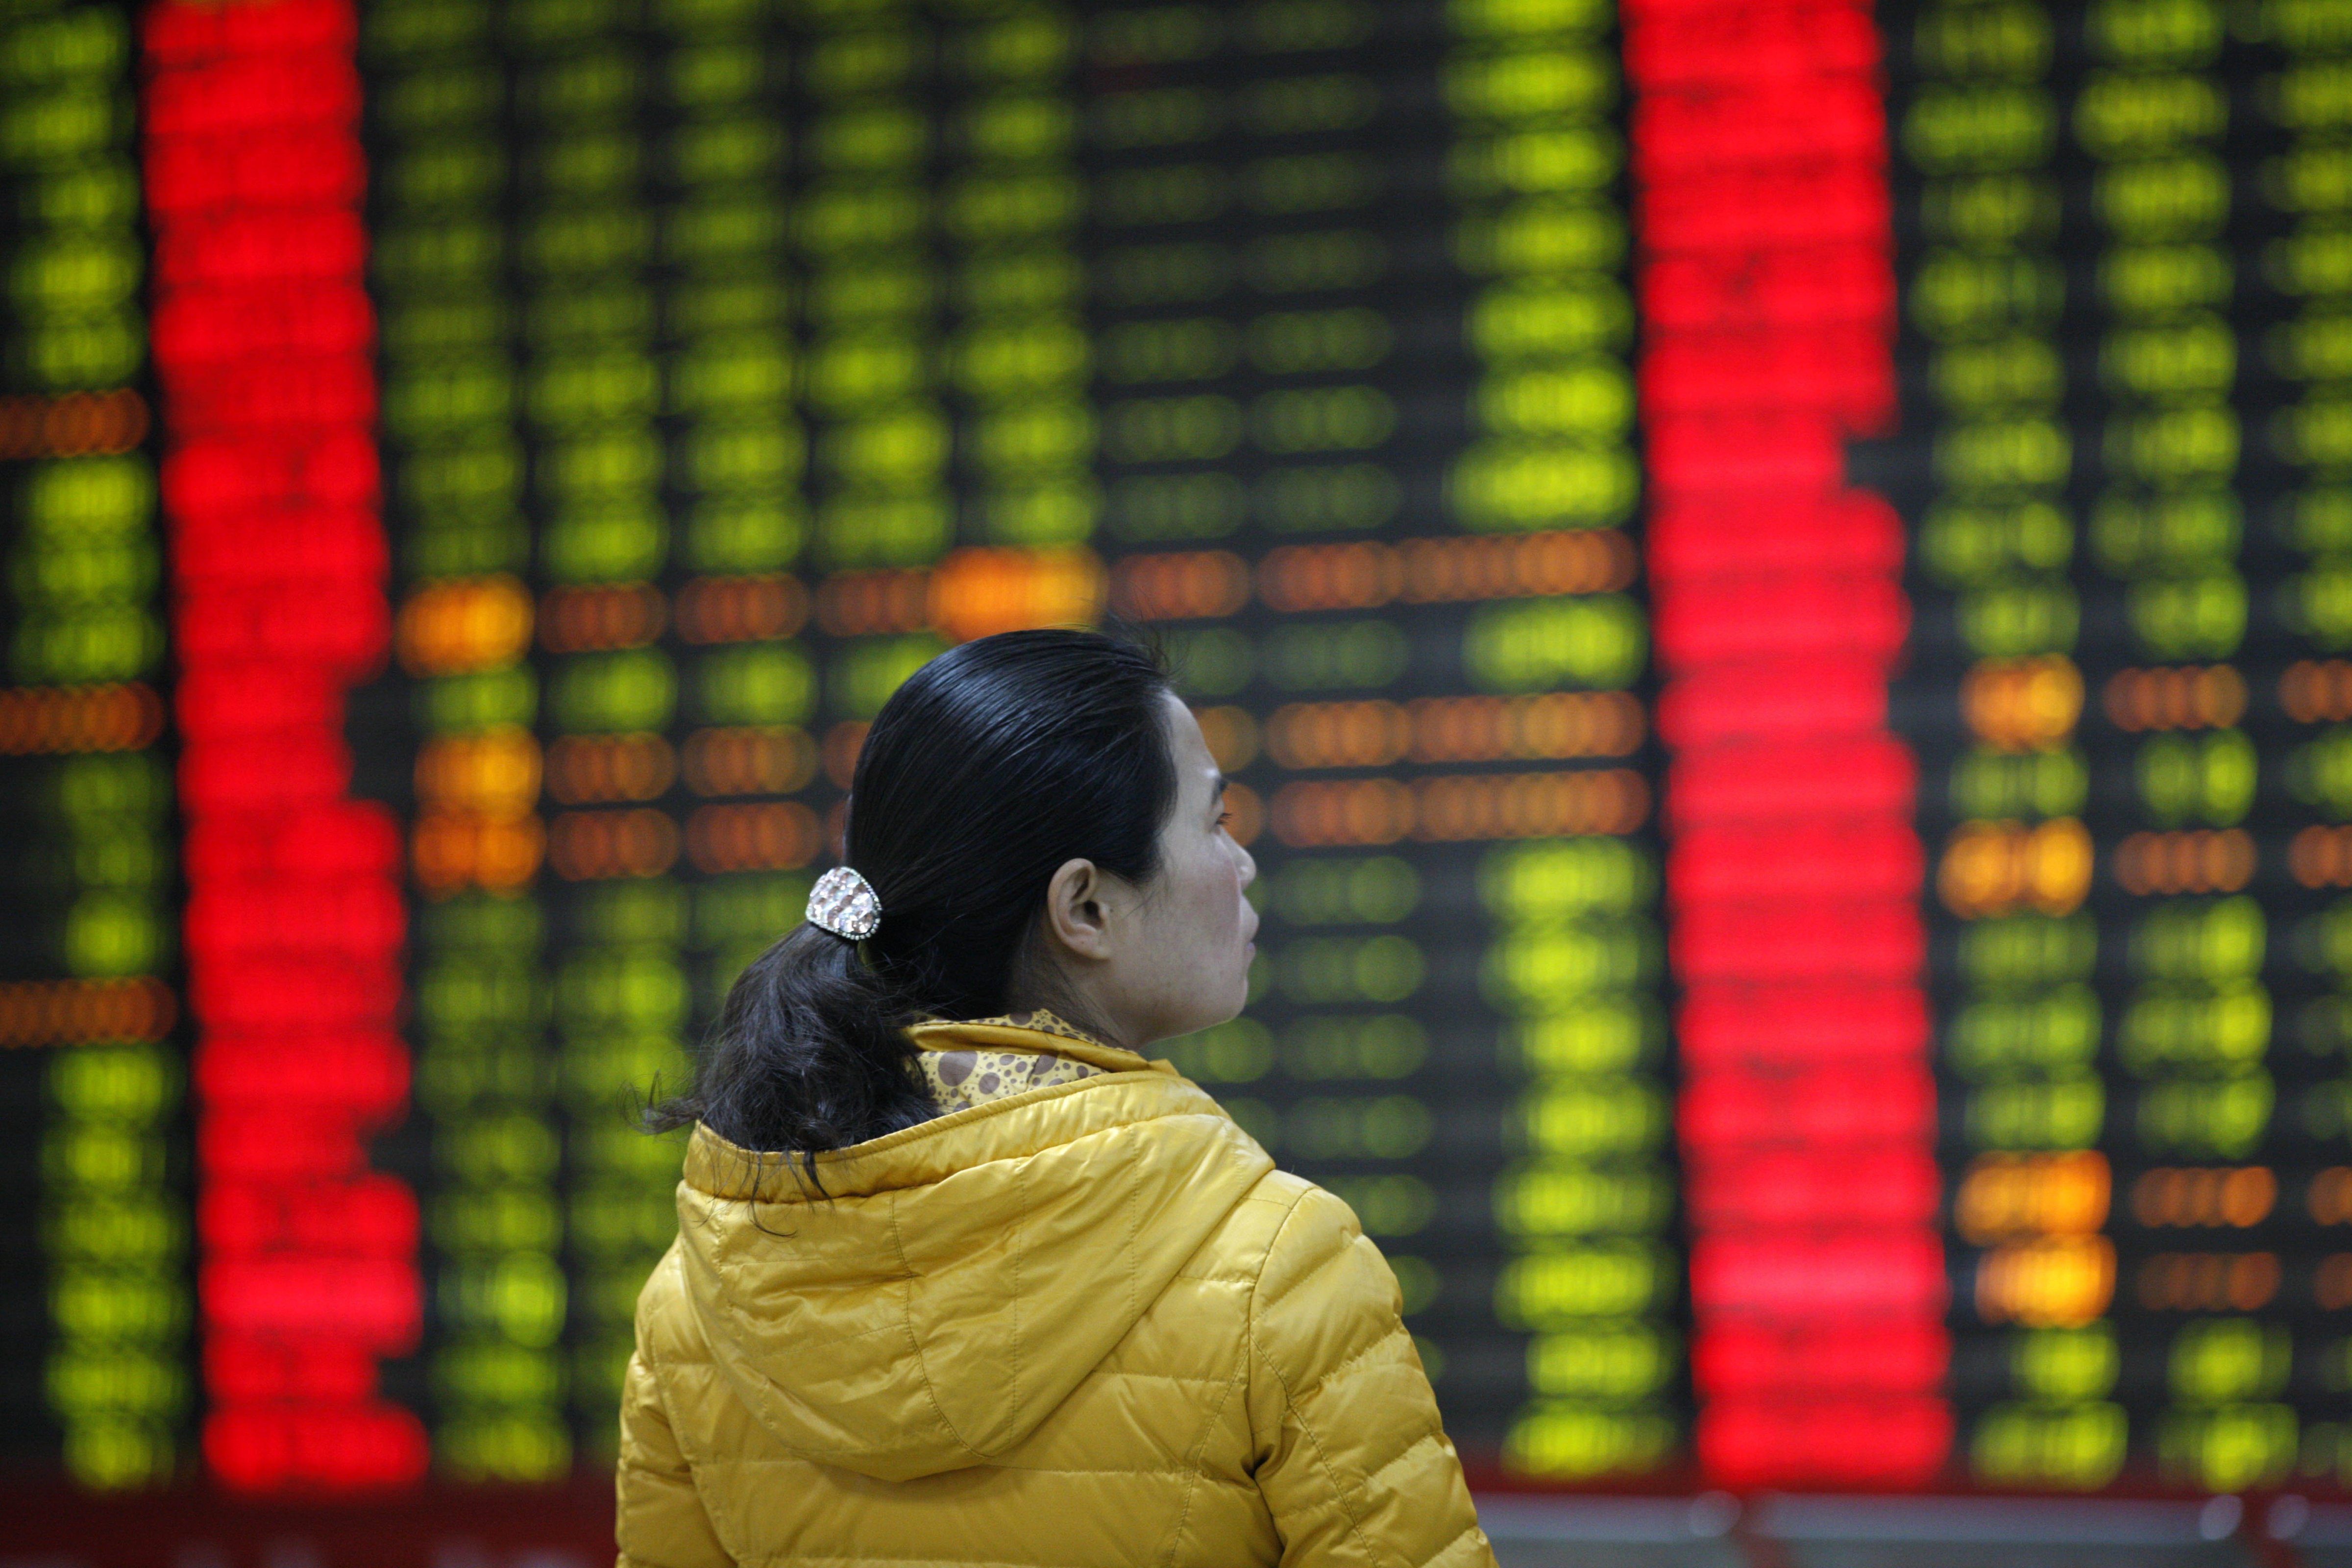 An investor watches electric boards in a stock market in Huaibei, Anhui province, east China on Jan. 7, 2016. (Zhengyi Xie—Cpressphoto/Corbis)